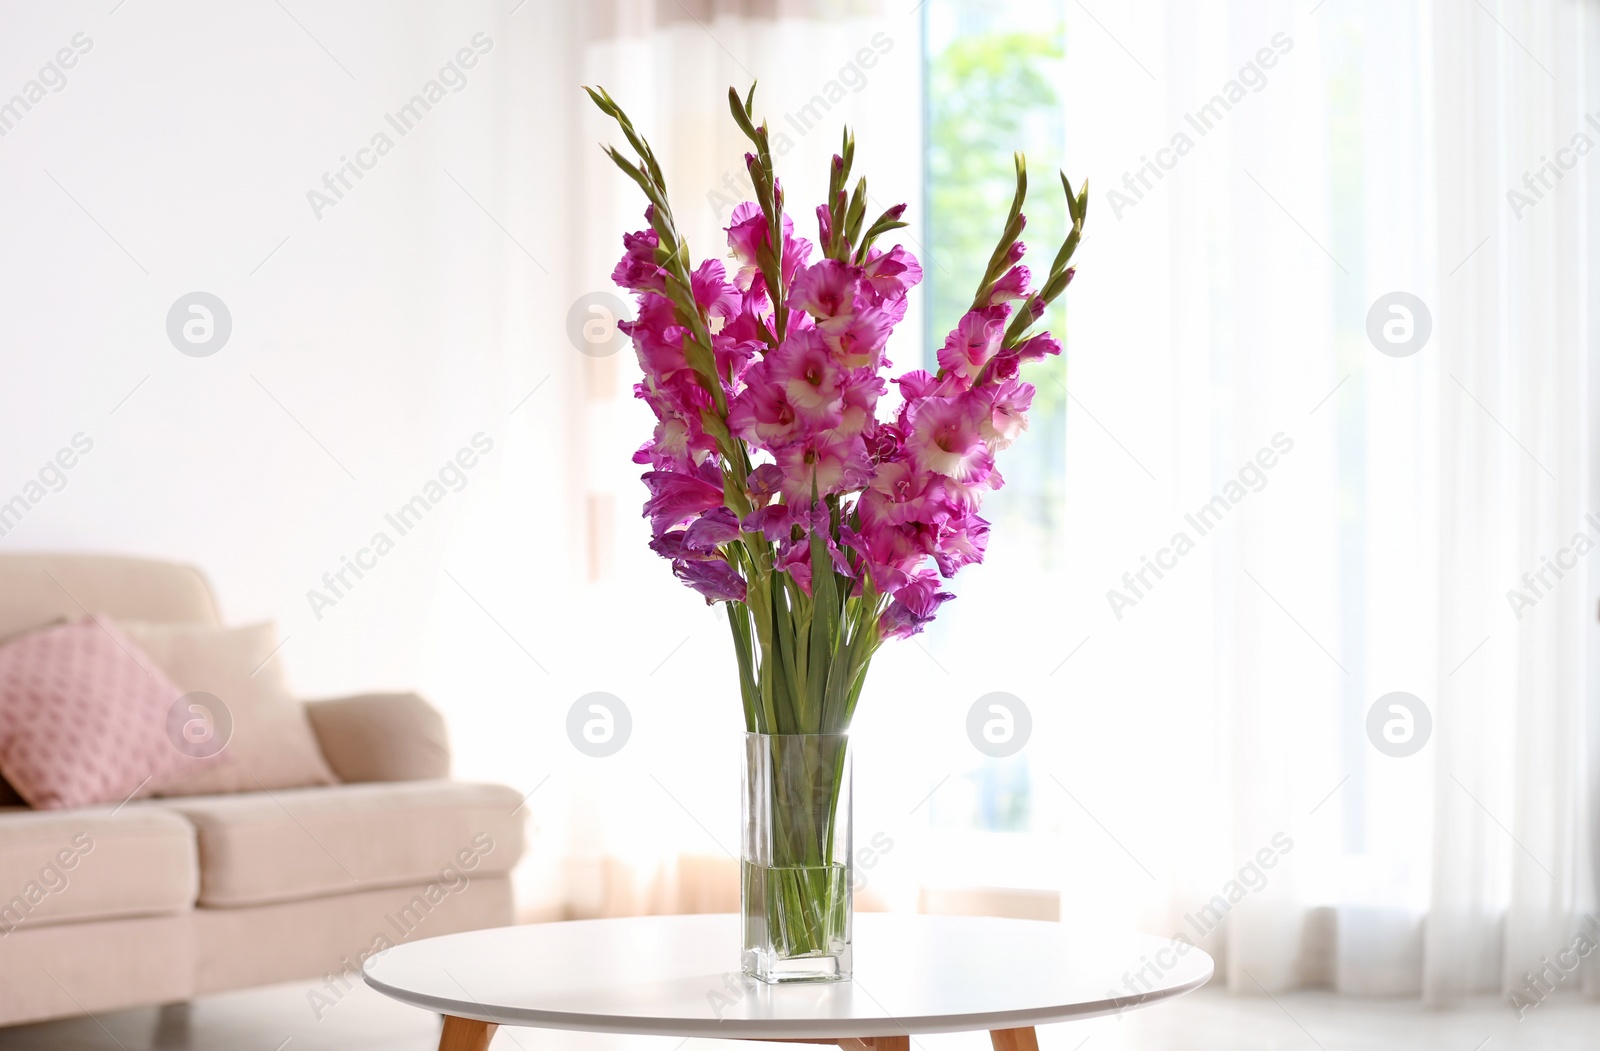 Photo of Vase with beautiful pink gladiolus flowers on wooden table in living room